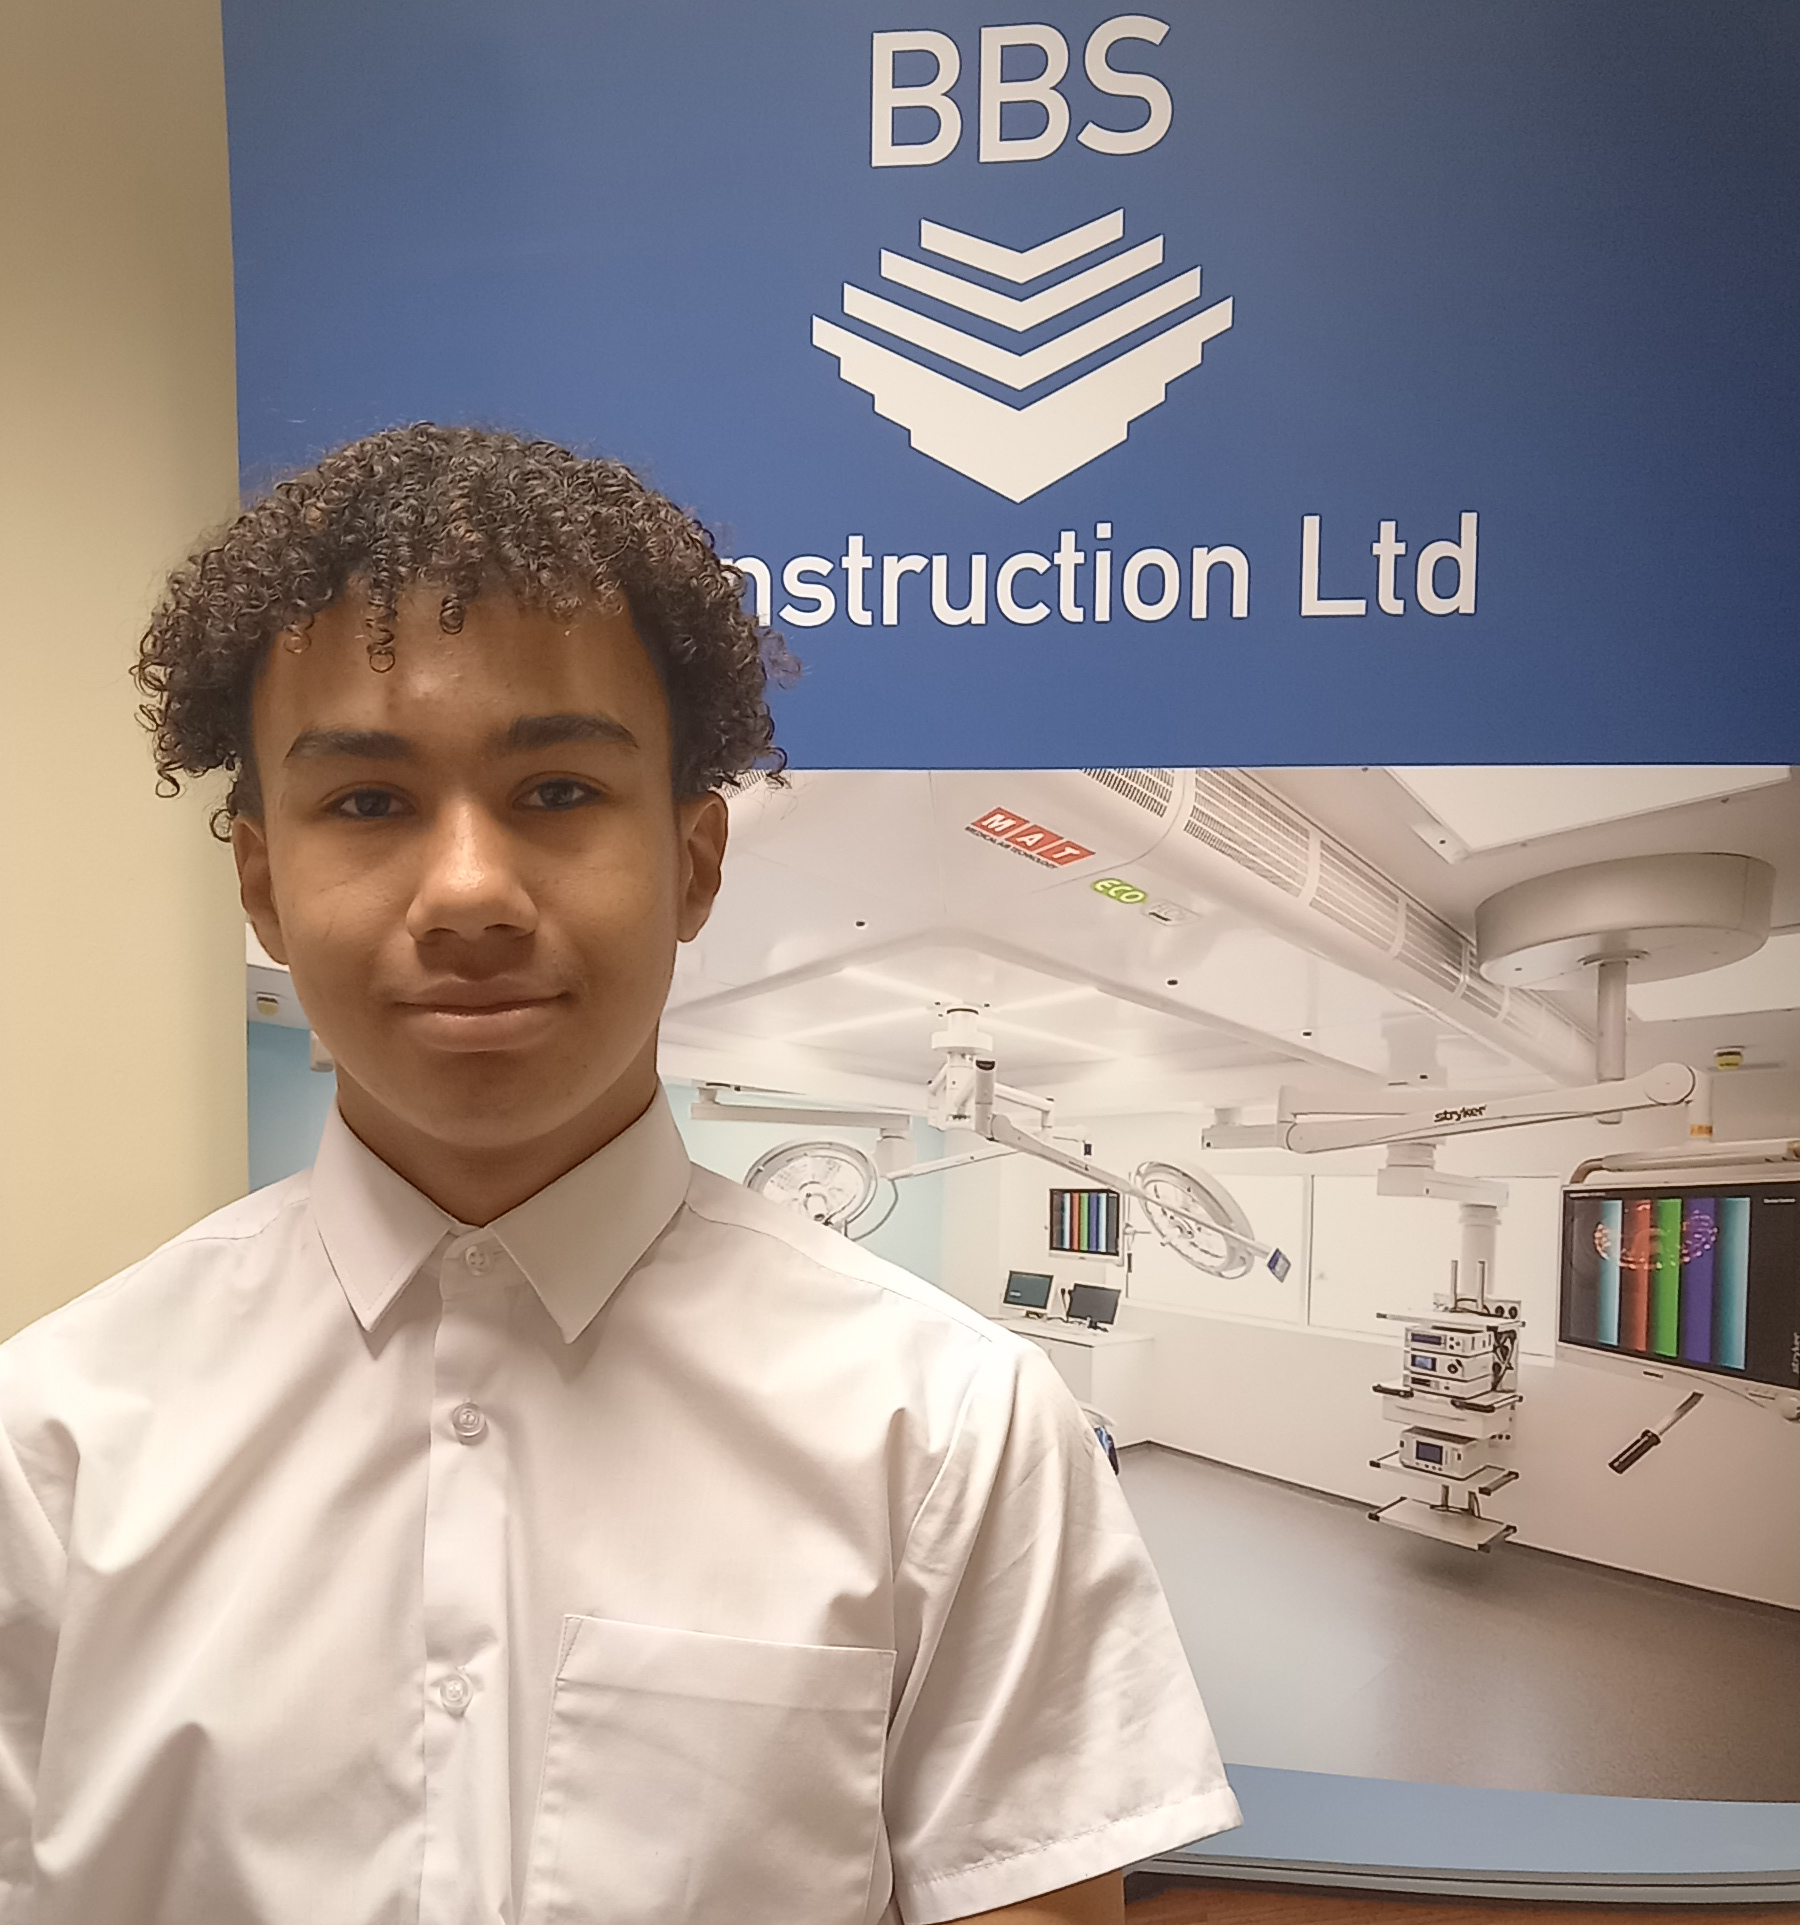 CCE welcomes work experience student